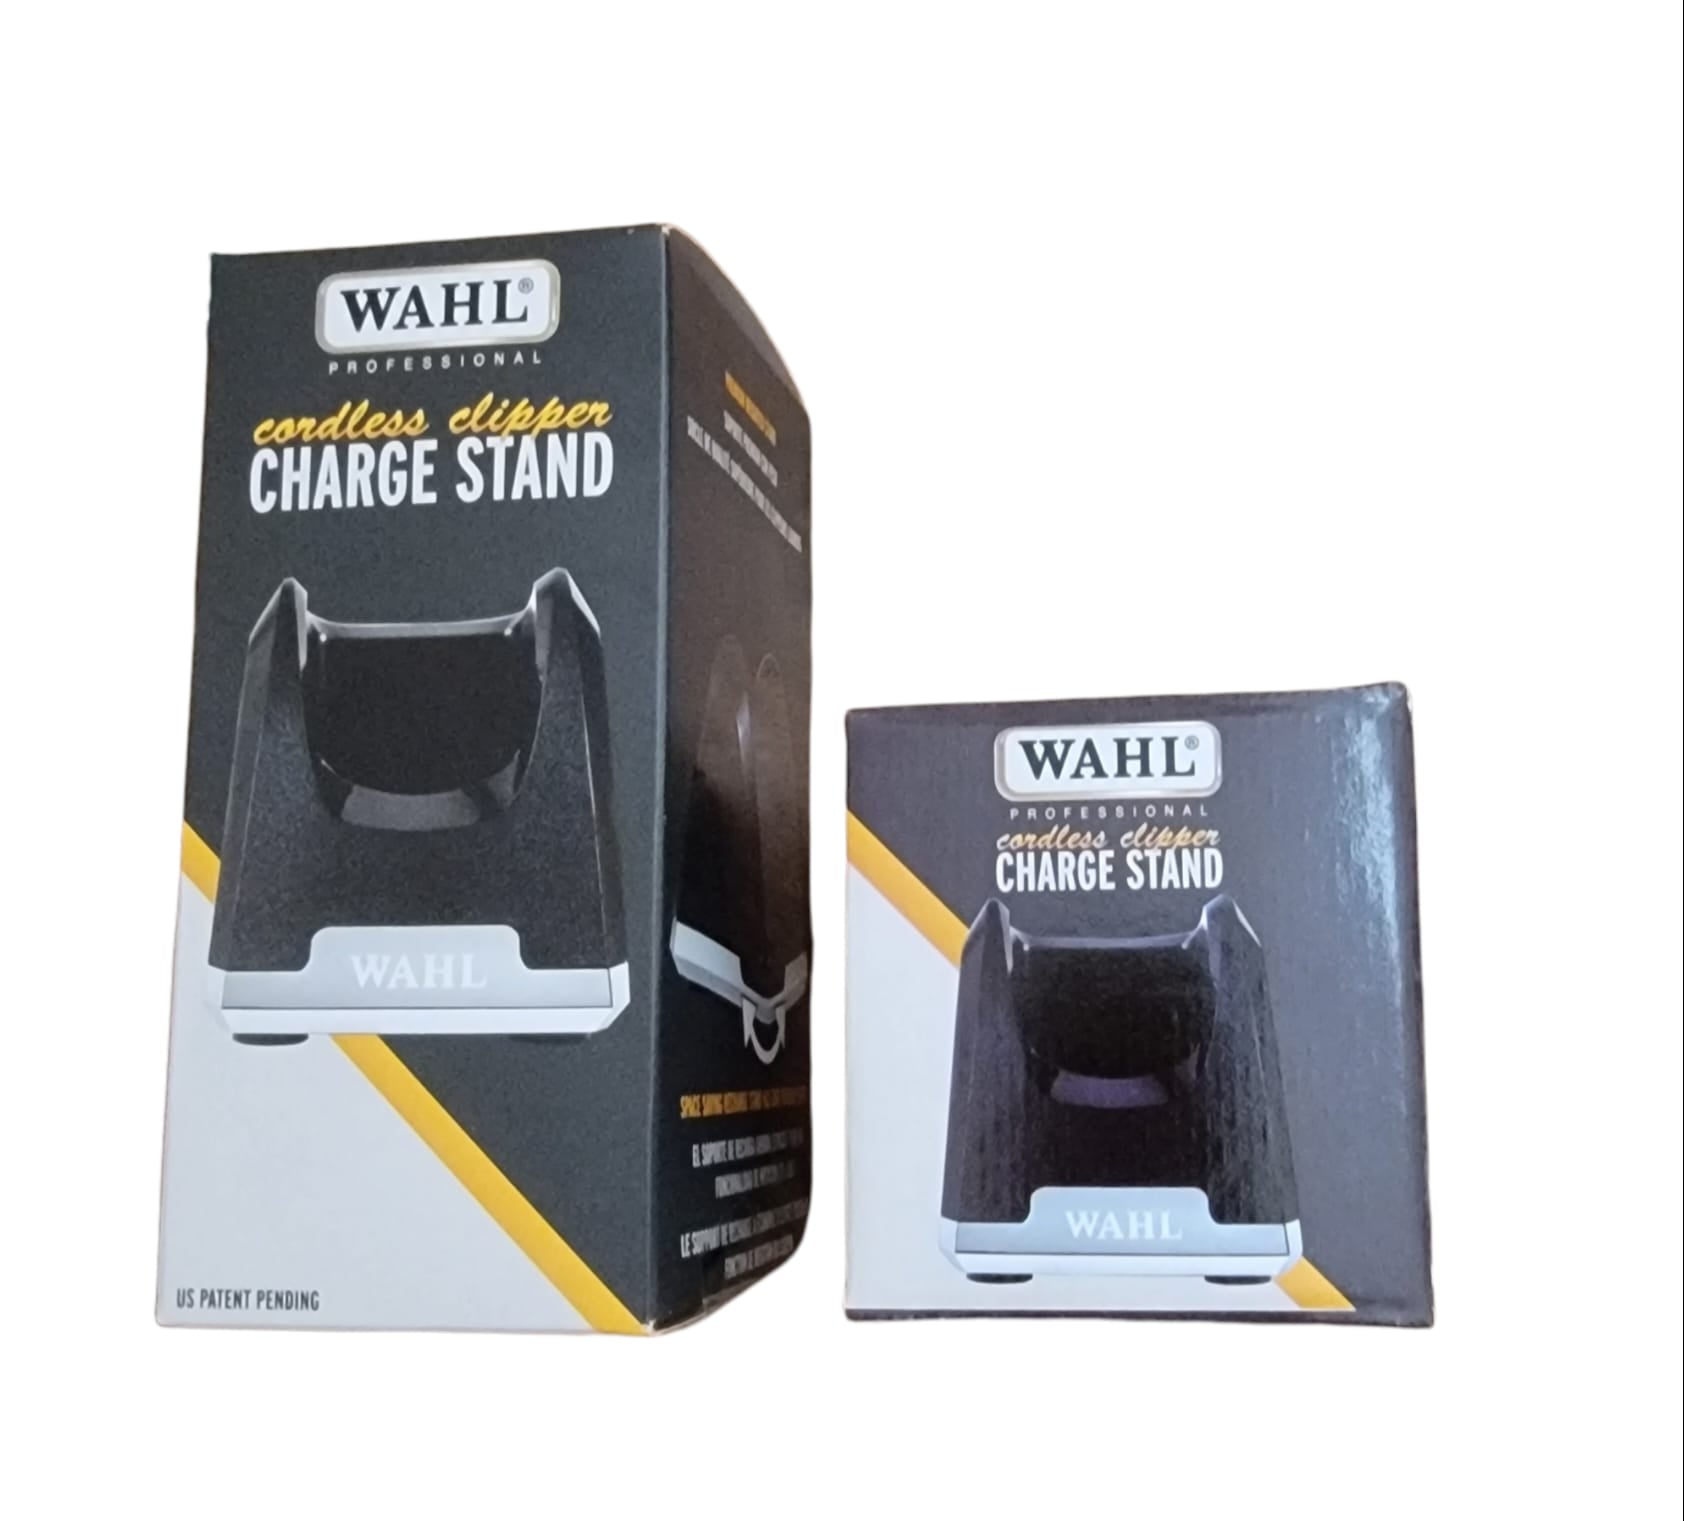 types of packaging for wahl charging stand